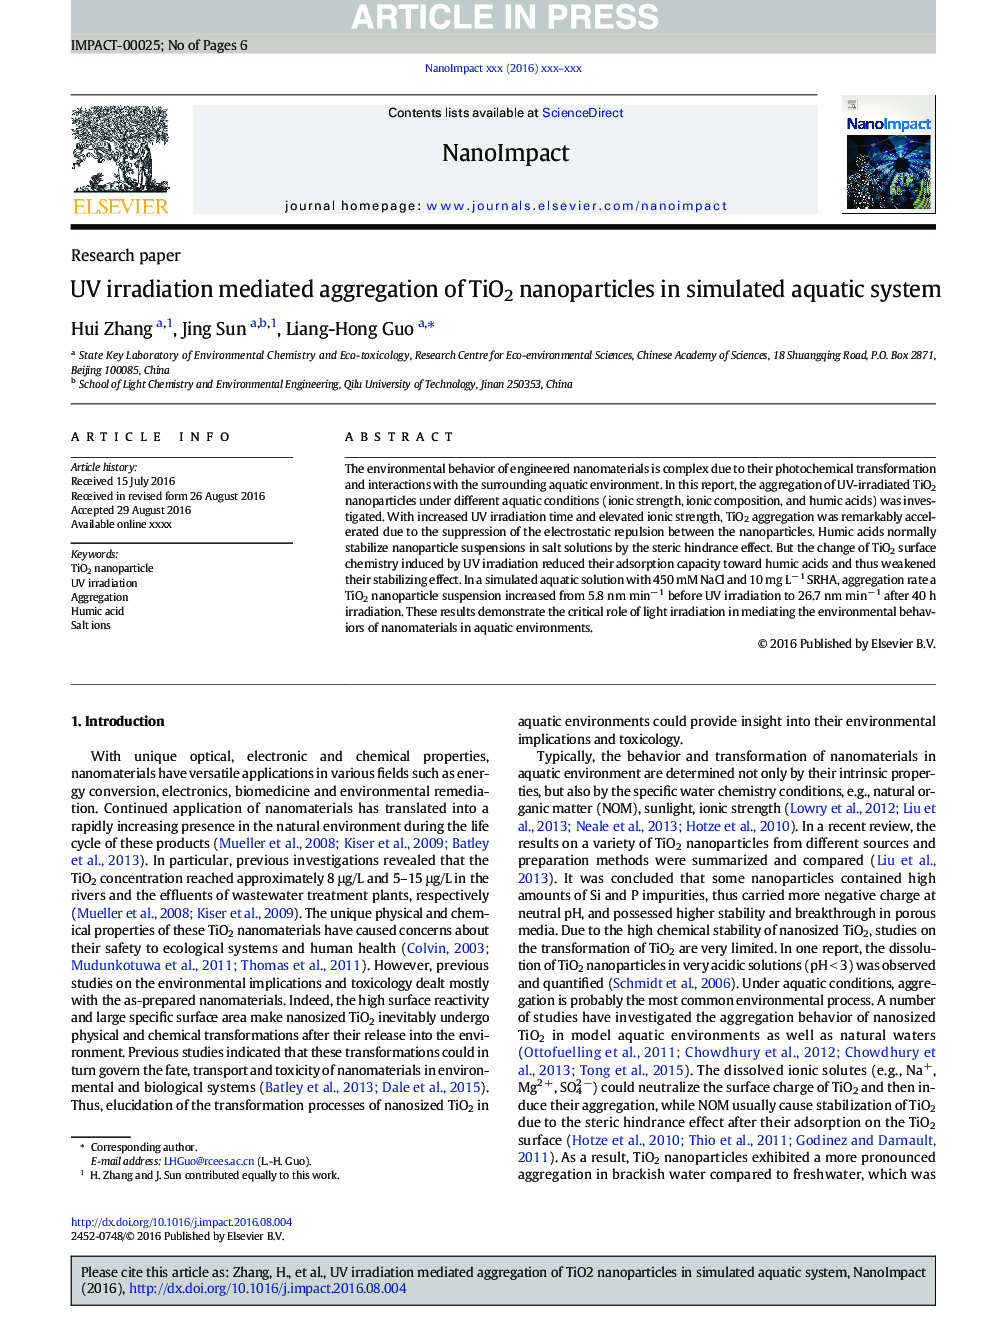 UV irradiation mediated aggregation of TiO2 nanoparticles in simulated aquatic system